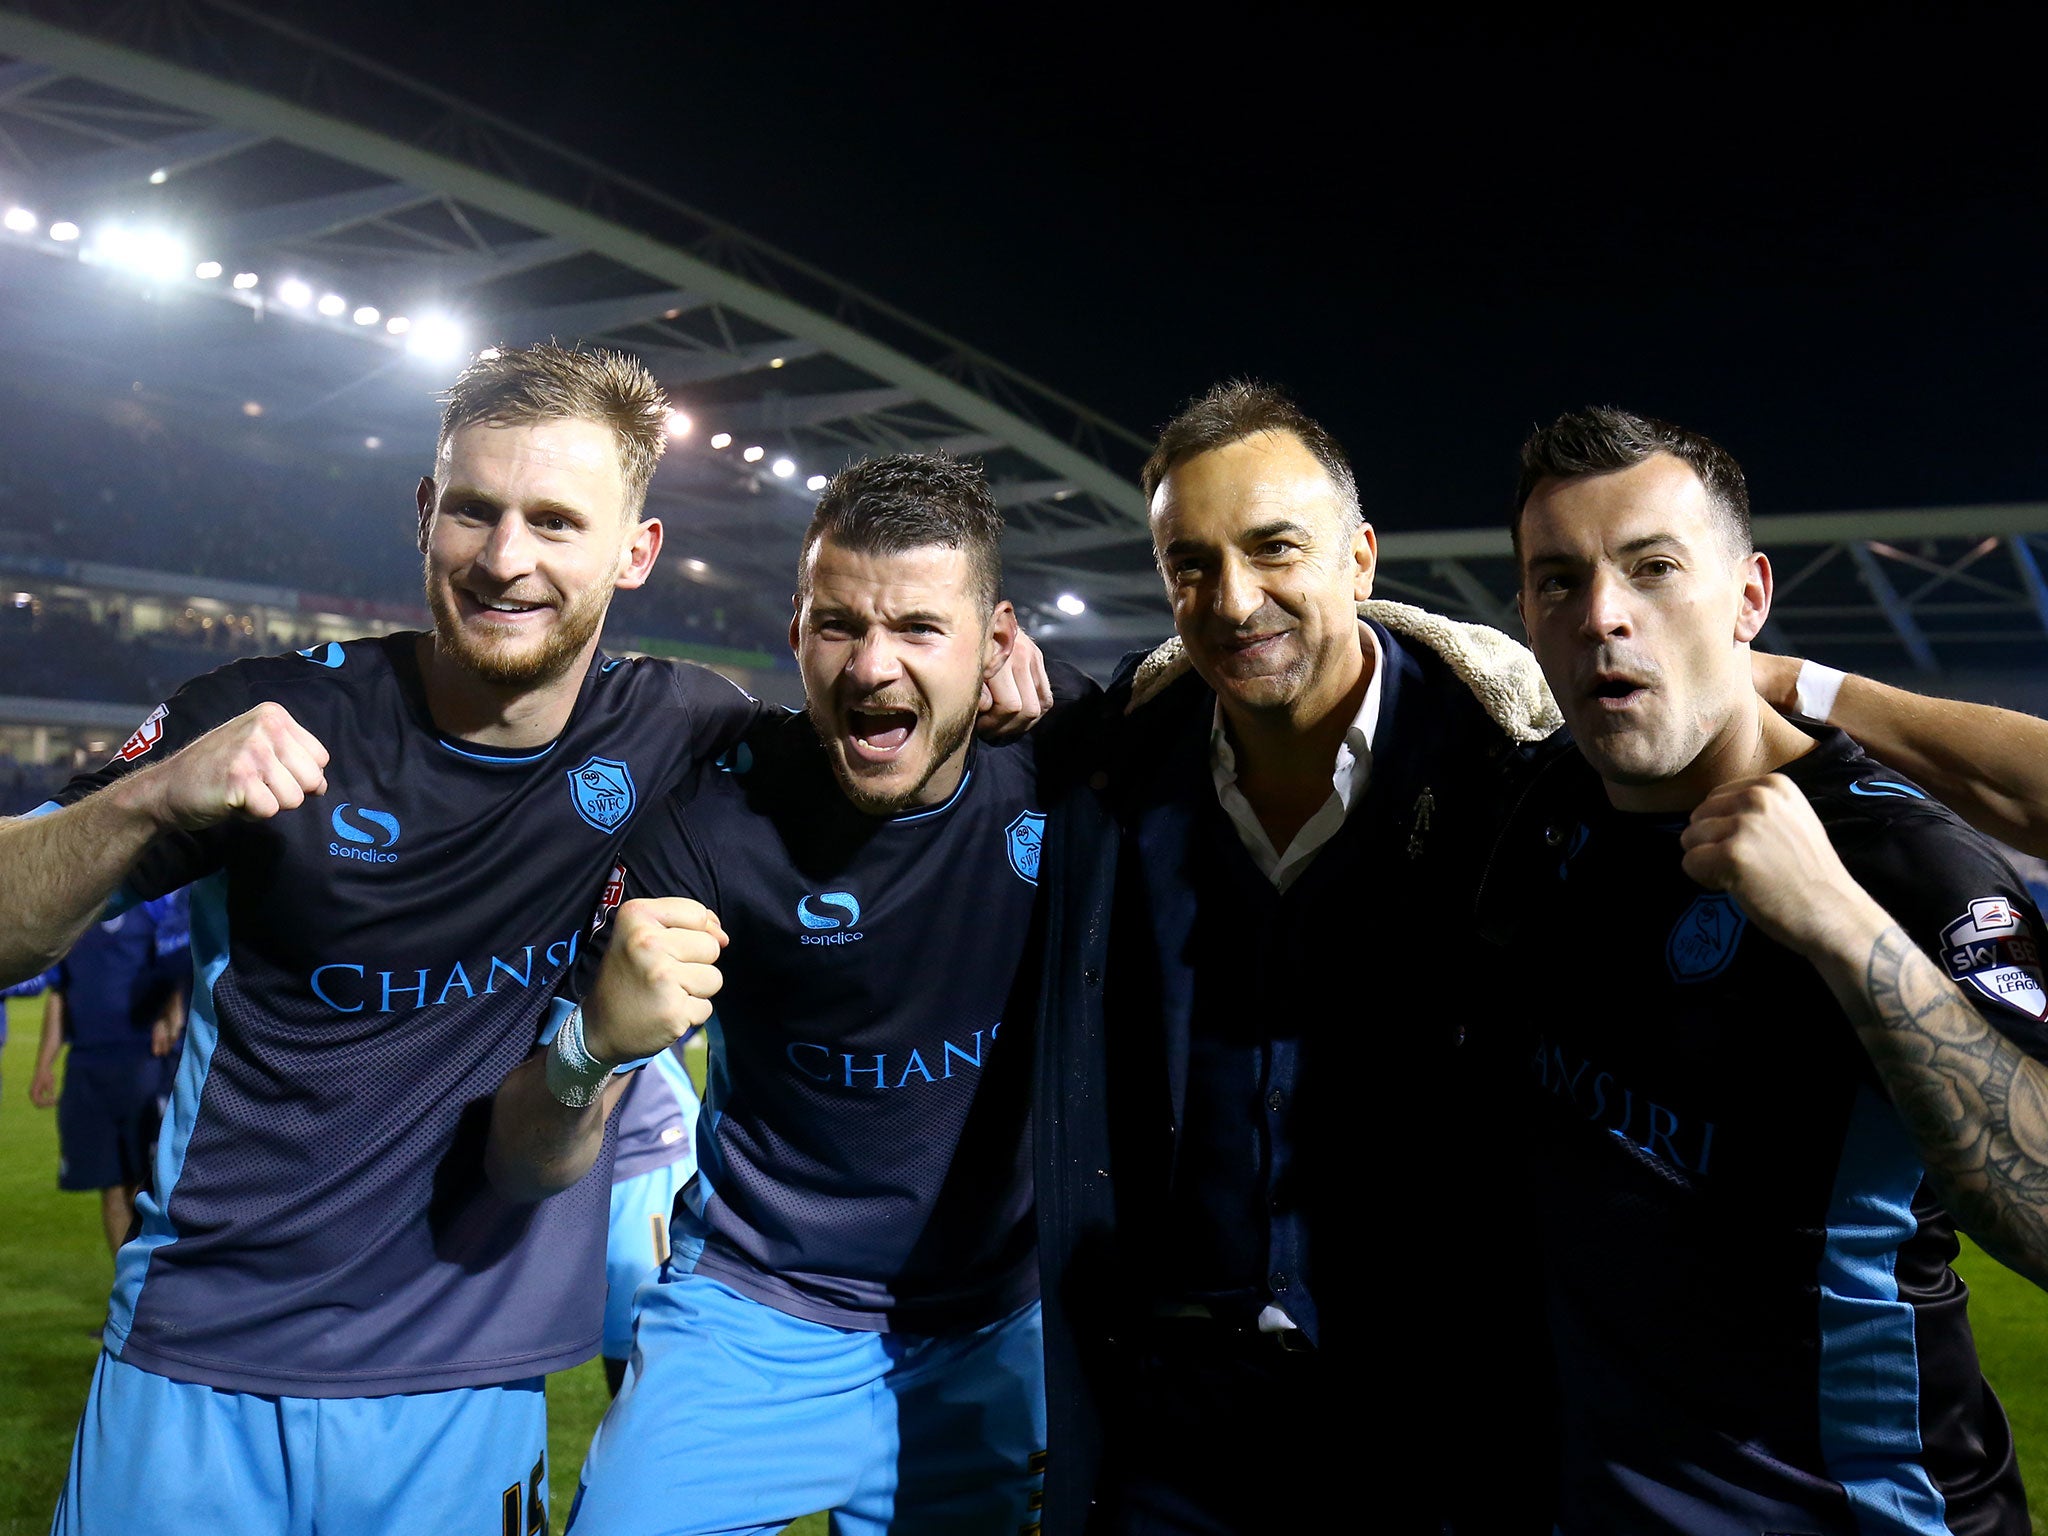 Sheffield Wednesday's Tom Lees, Daniel Pudil, manager Carlos Carvalhal and goalscorer Ross Wallace